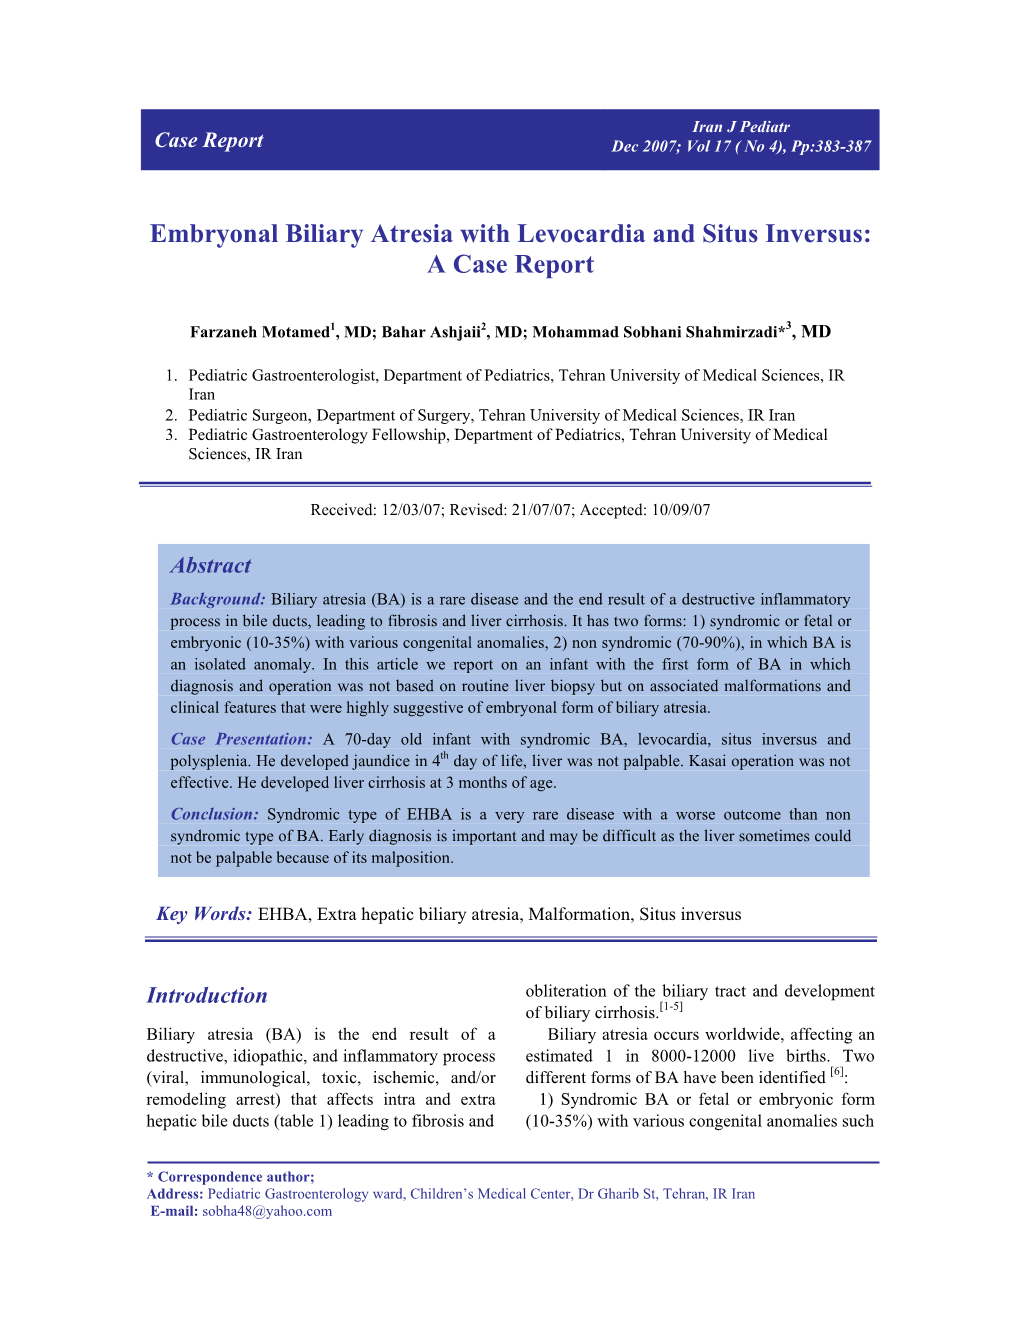 Embryonal Biliary Atresia with Levocardia and Situs Inversus: a Case Report